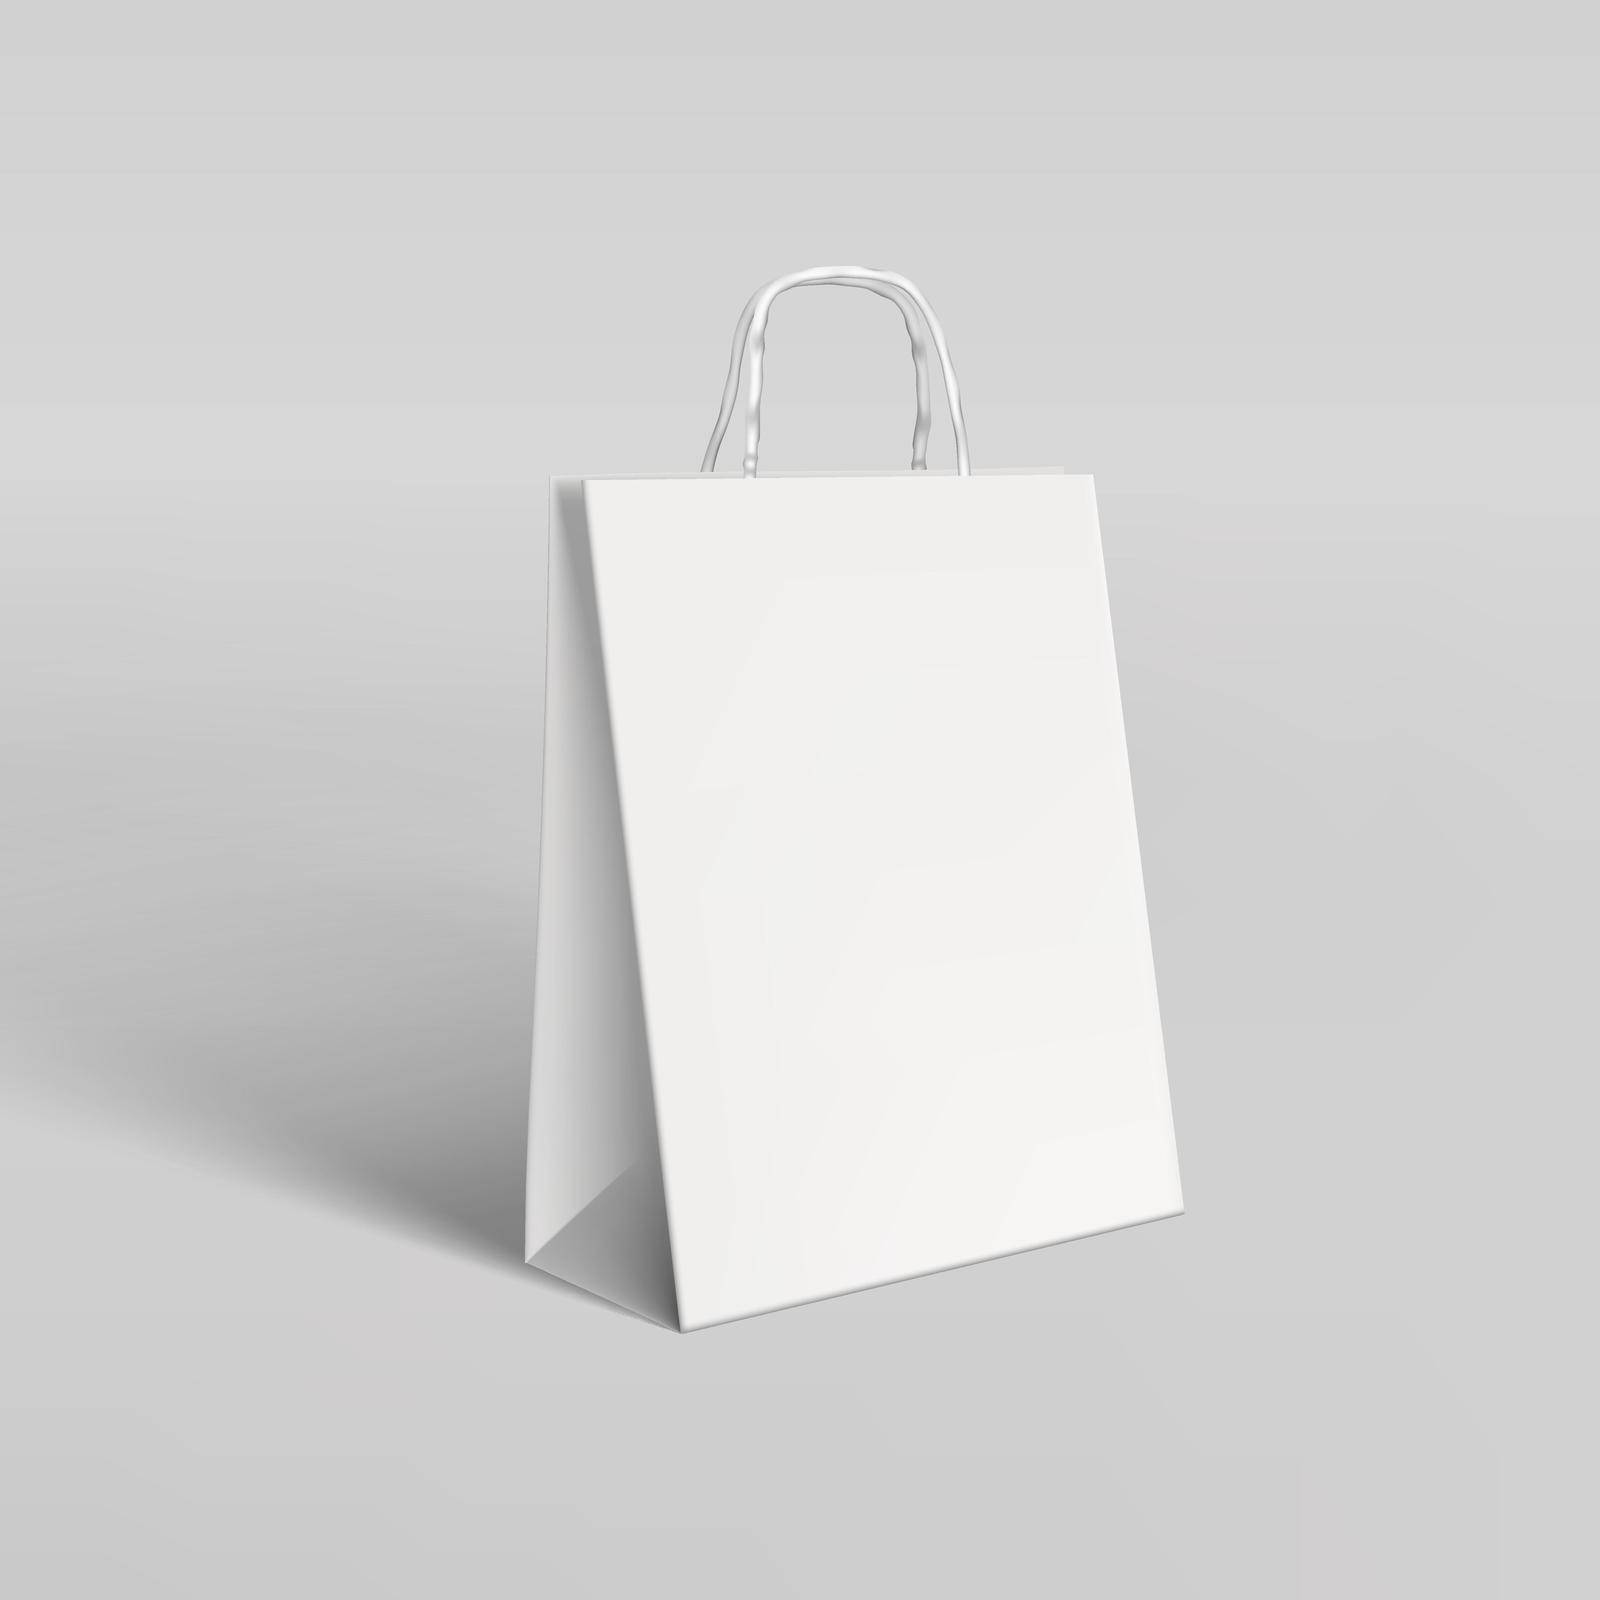 3D Paper Bag With Shadow For Branding. EPS10 Vector